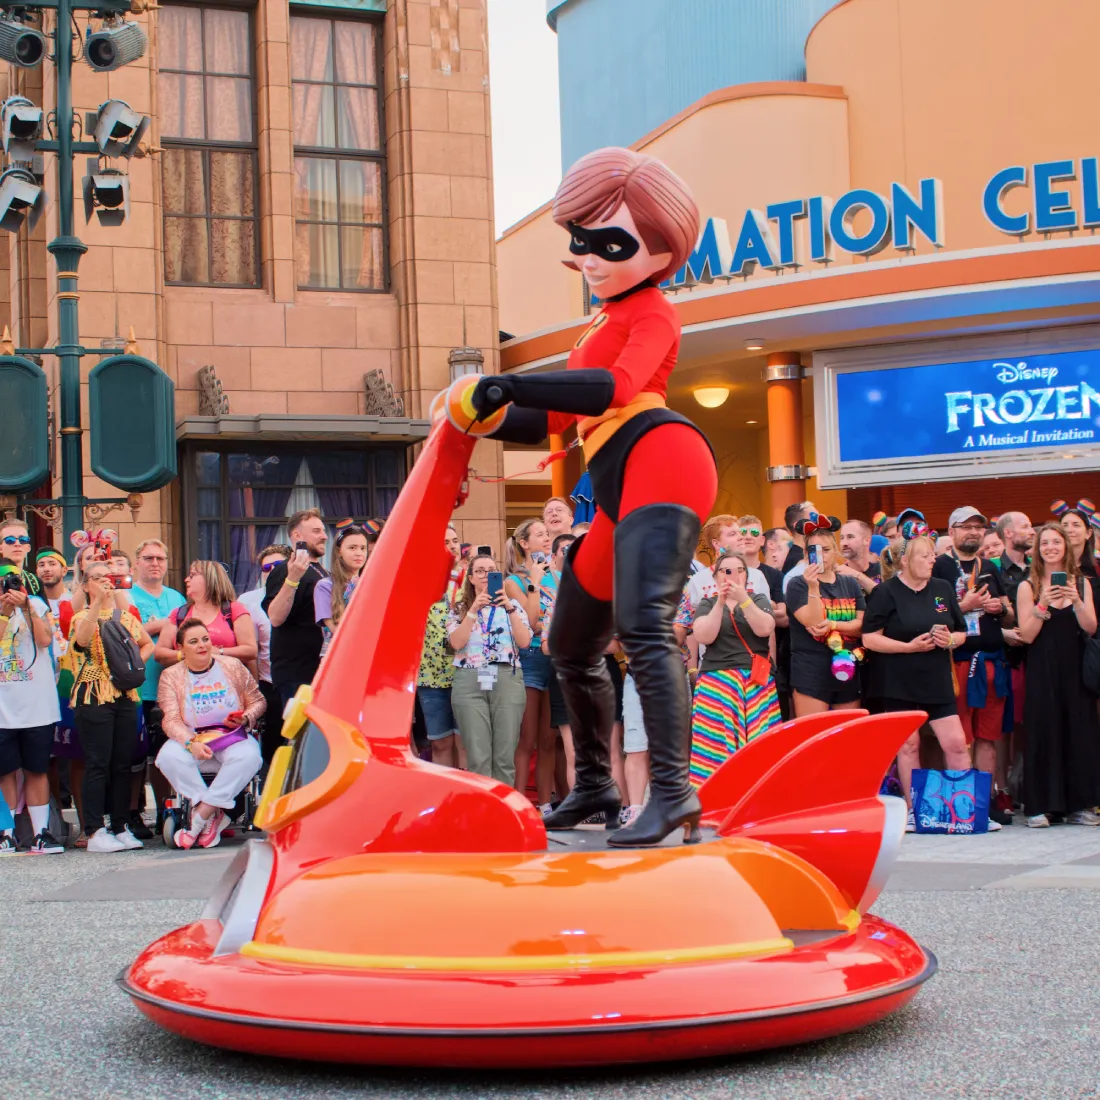 Mrs. Incredible followed right behind her husband © Coupleofmen.com